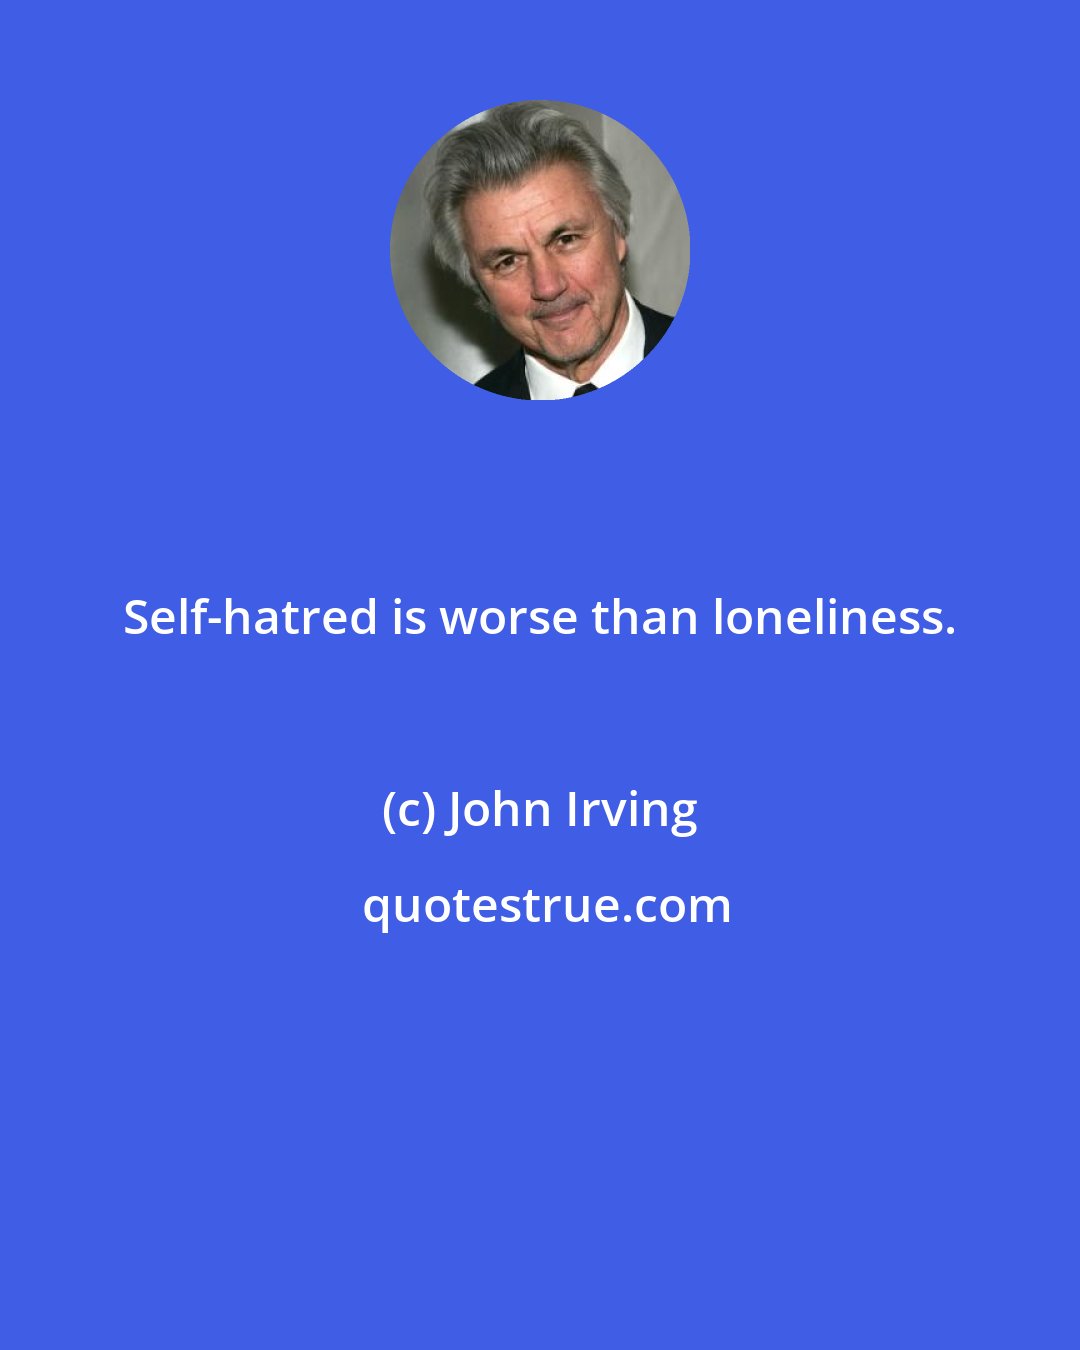 John Irving: Self-hatred is worse than loneliness.